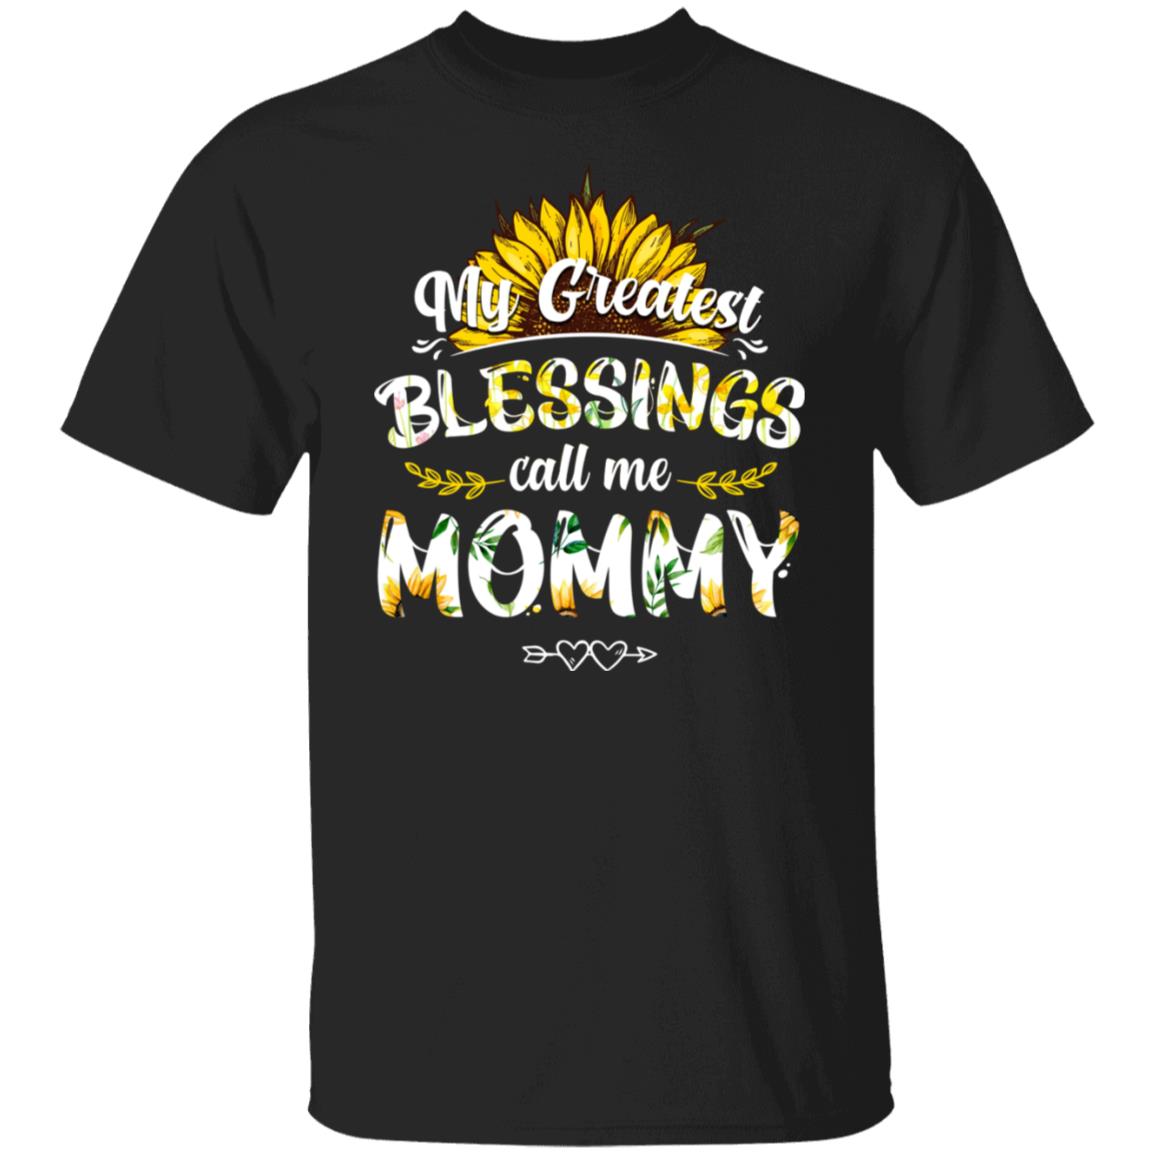 My Greatest Blessings Call Me Mommy Tee Mothers Day Shirt